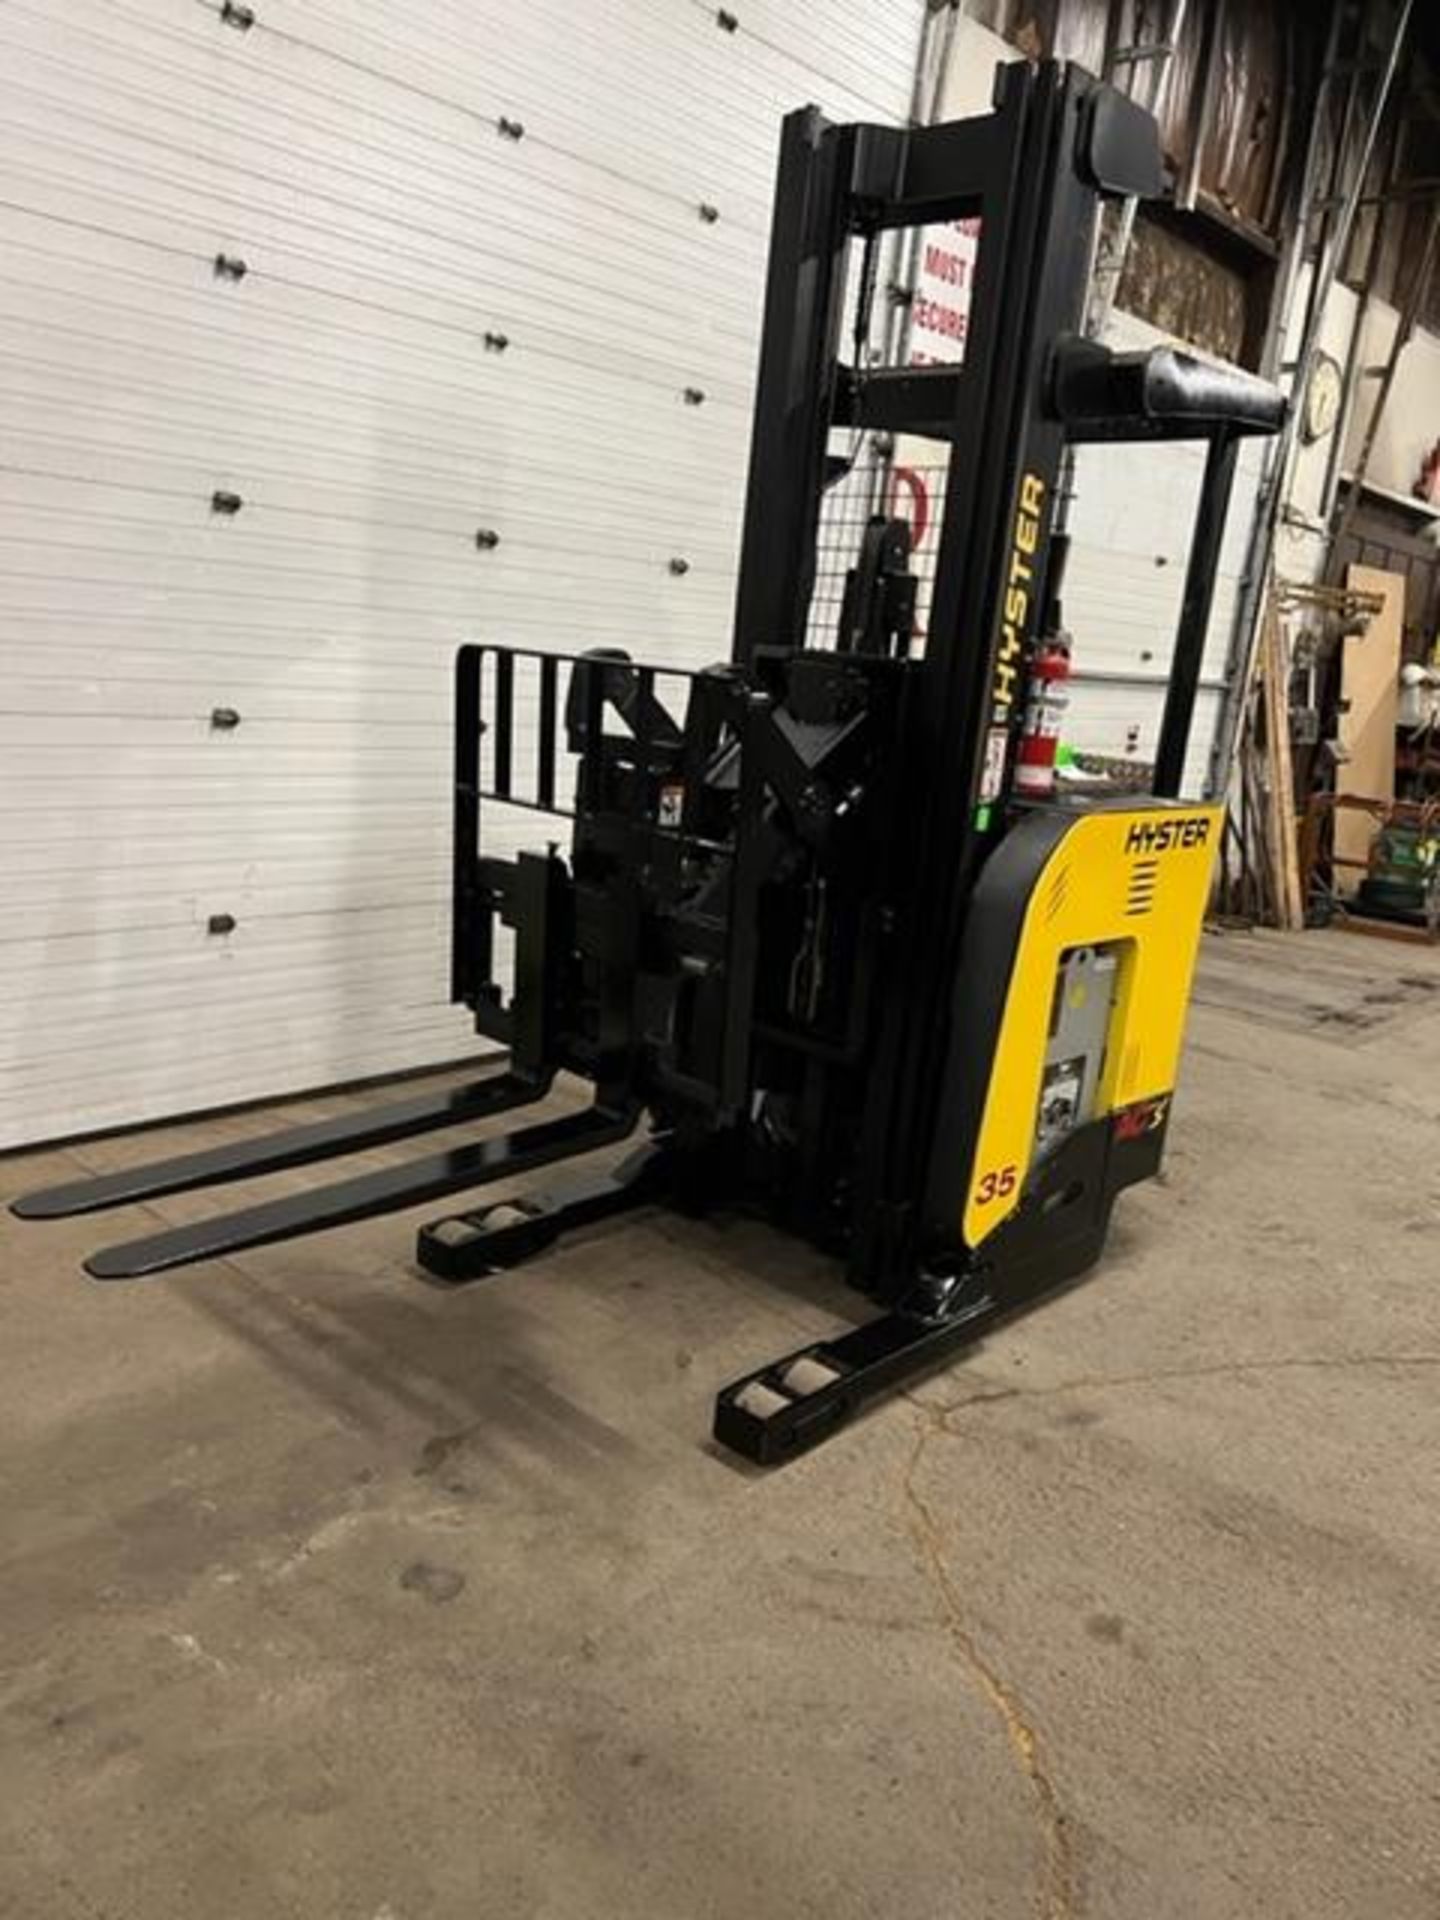 FREE CUSTOMS - 2016 Hyster Reach Truck Pallet Lifter REACH TRUCK 3500lbs capacity electric MINT - Image 2 of 3